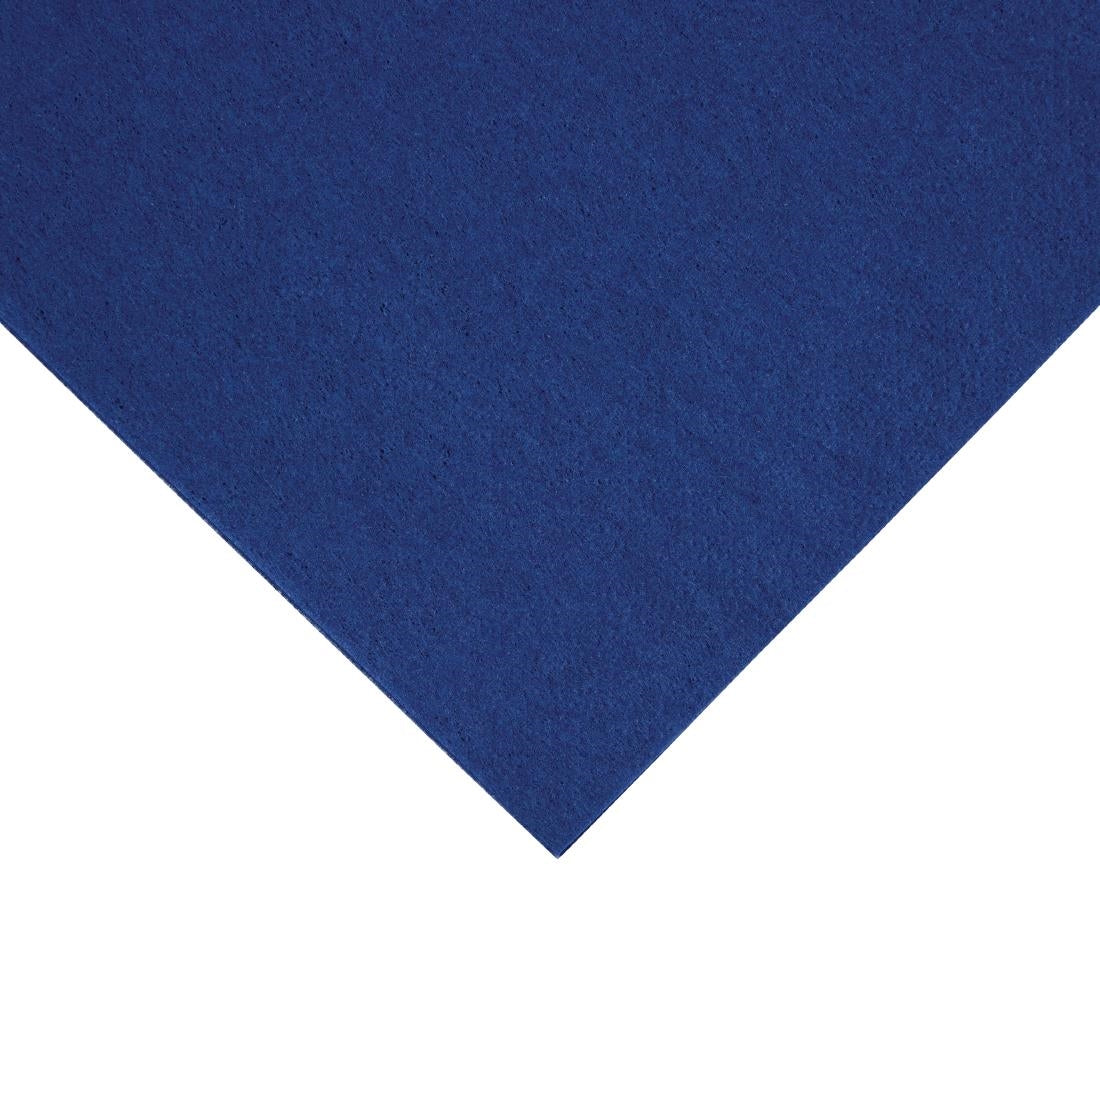 FE224 Fiesta Recyclable Lunch Napkin Blue 33x33cm 2ply 1/4 Fold (Pack of 2000) JD Catering Equipment Solutions Ltd